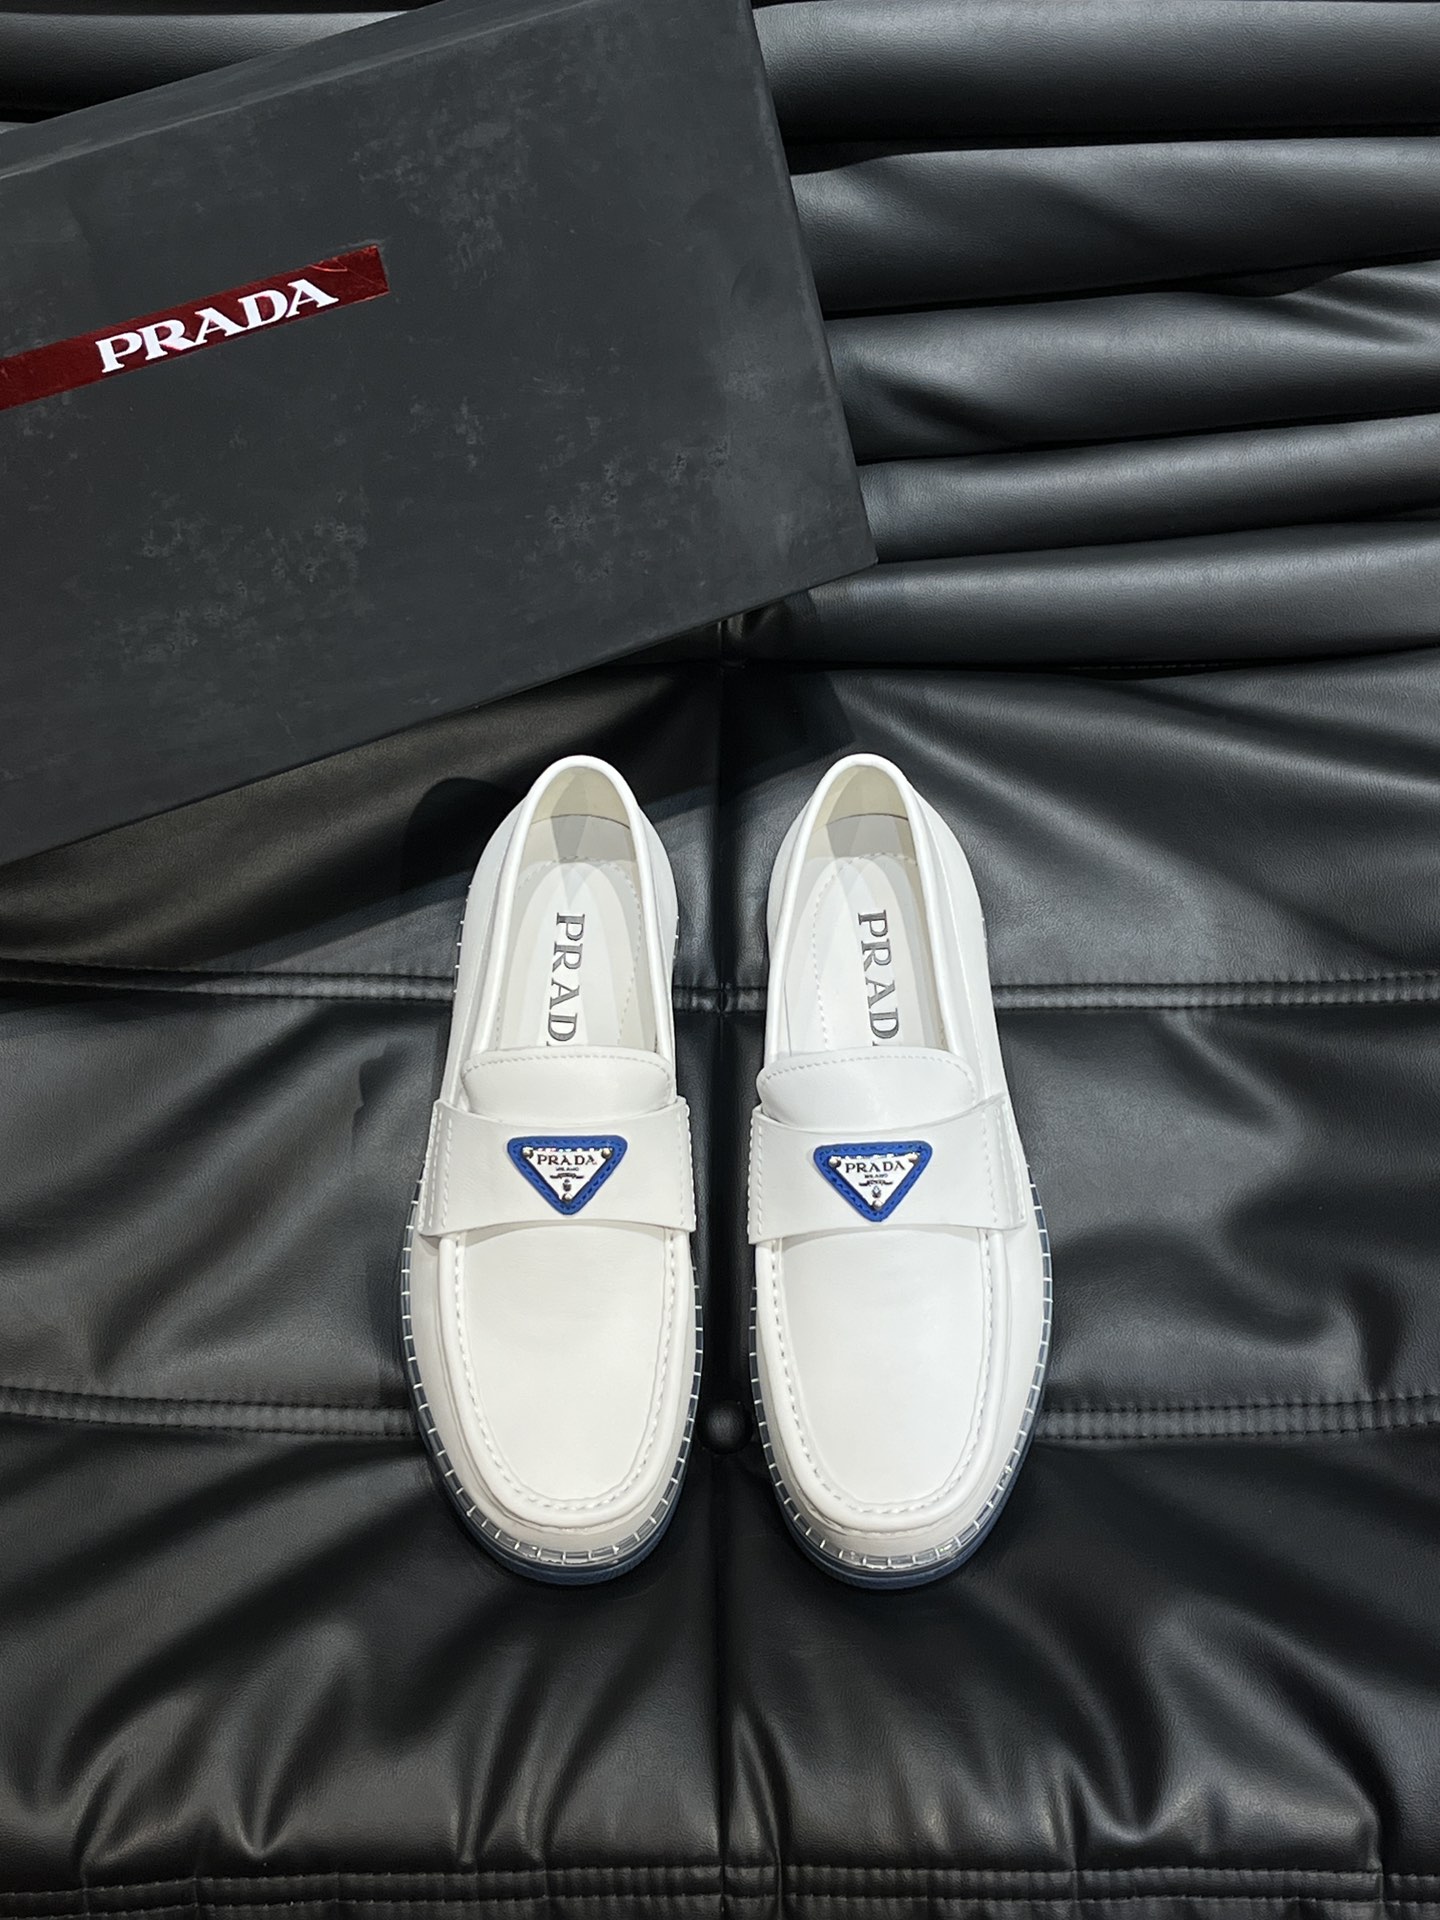 Prada Shoes Loafers Calfskin Cowhide Rubber